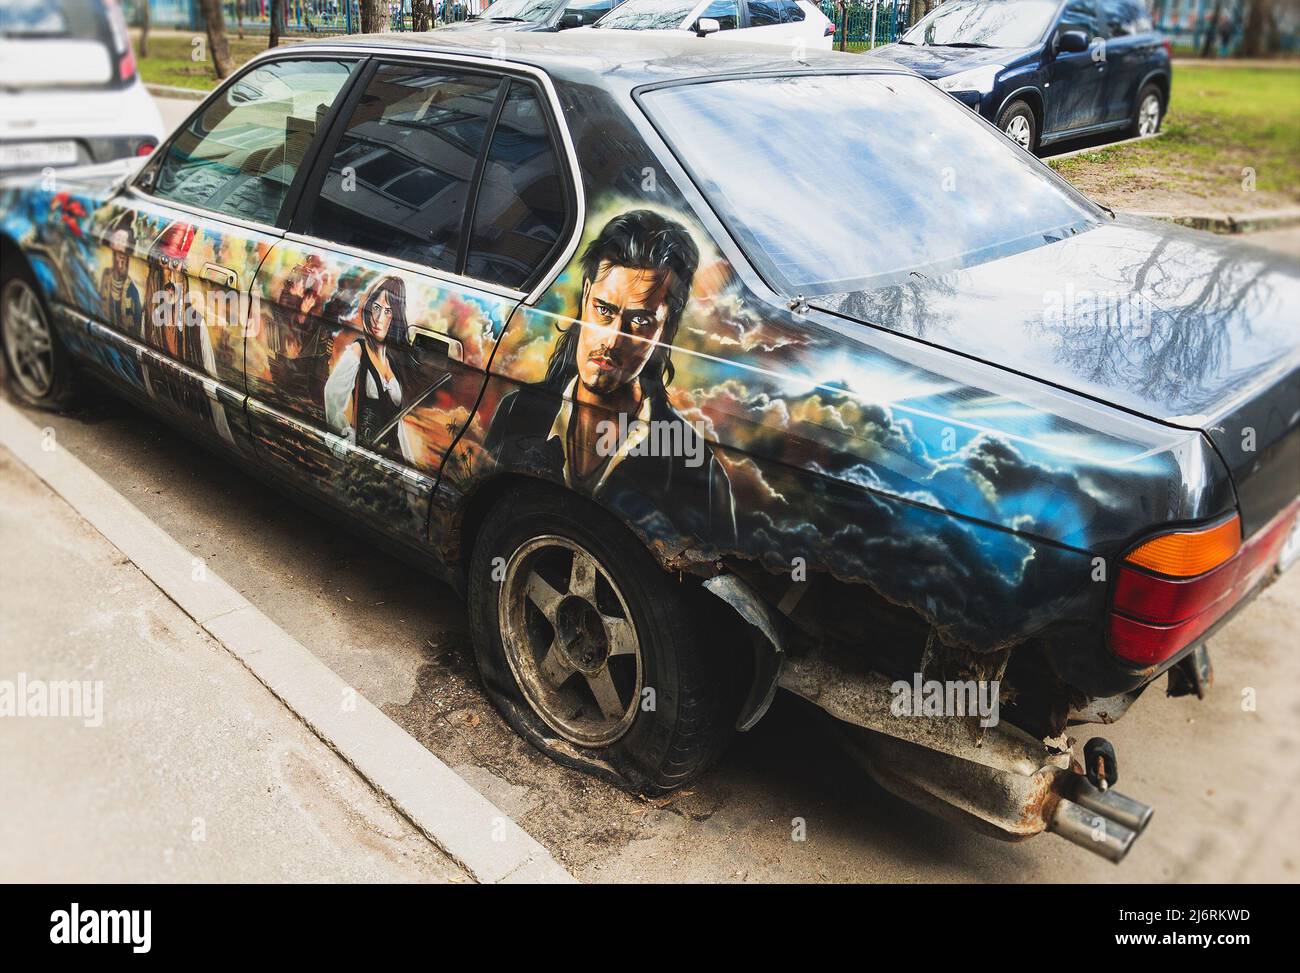 abandoned rusty car painted with film stars is parked in a residential area Stock Photo